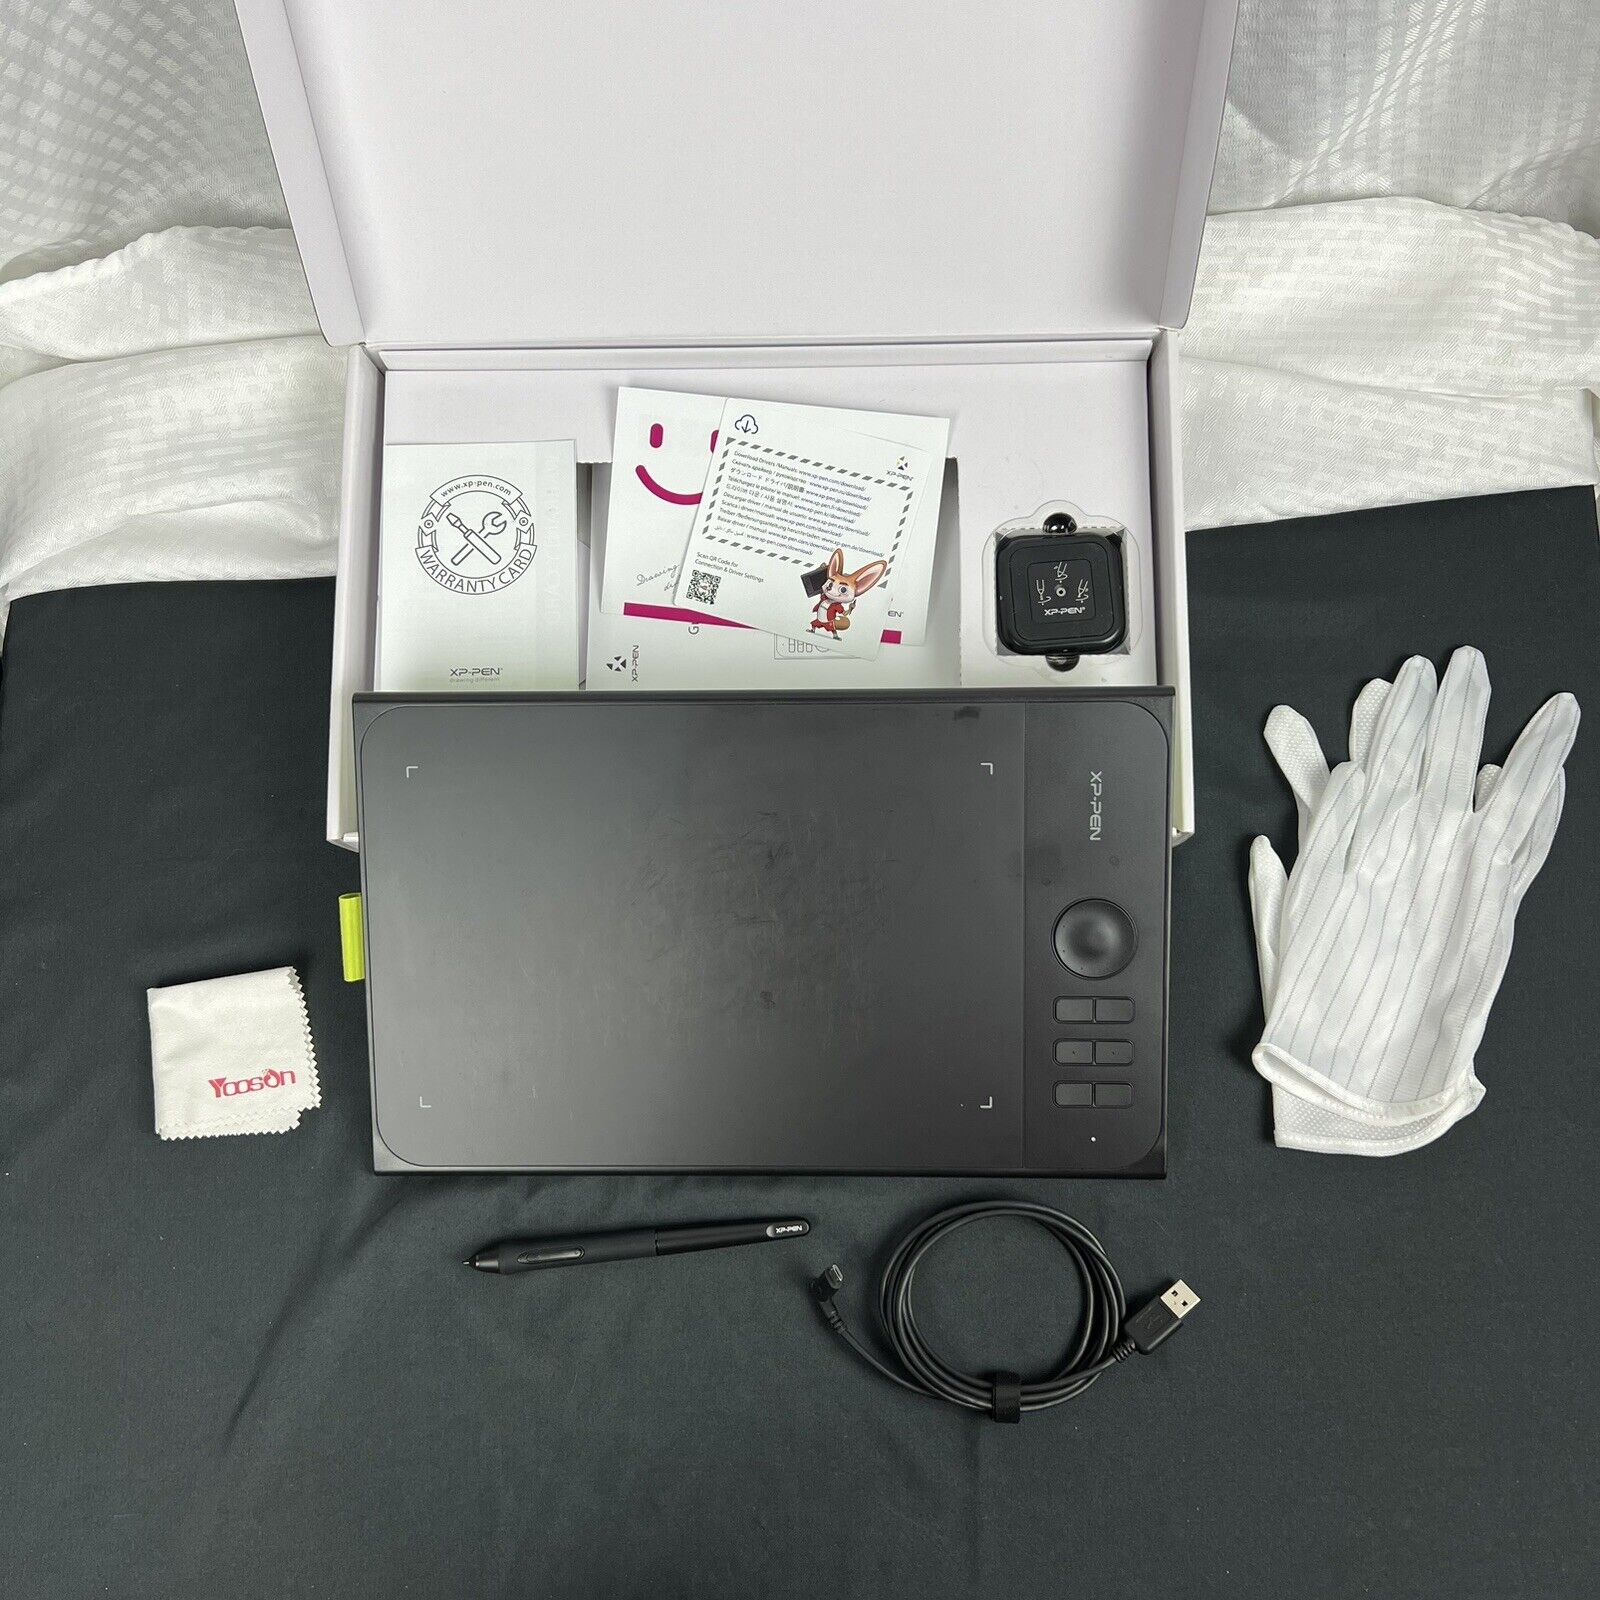 XP- Pen Wired Drawing Tablet Model Star 06C With Pen And Holder Included